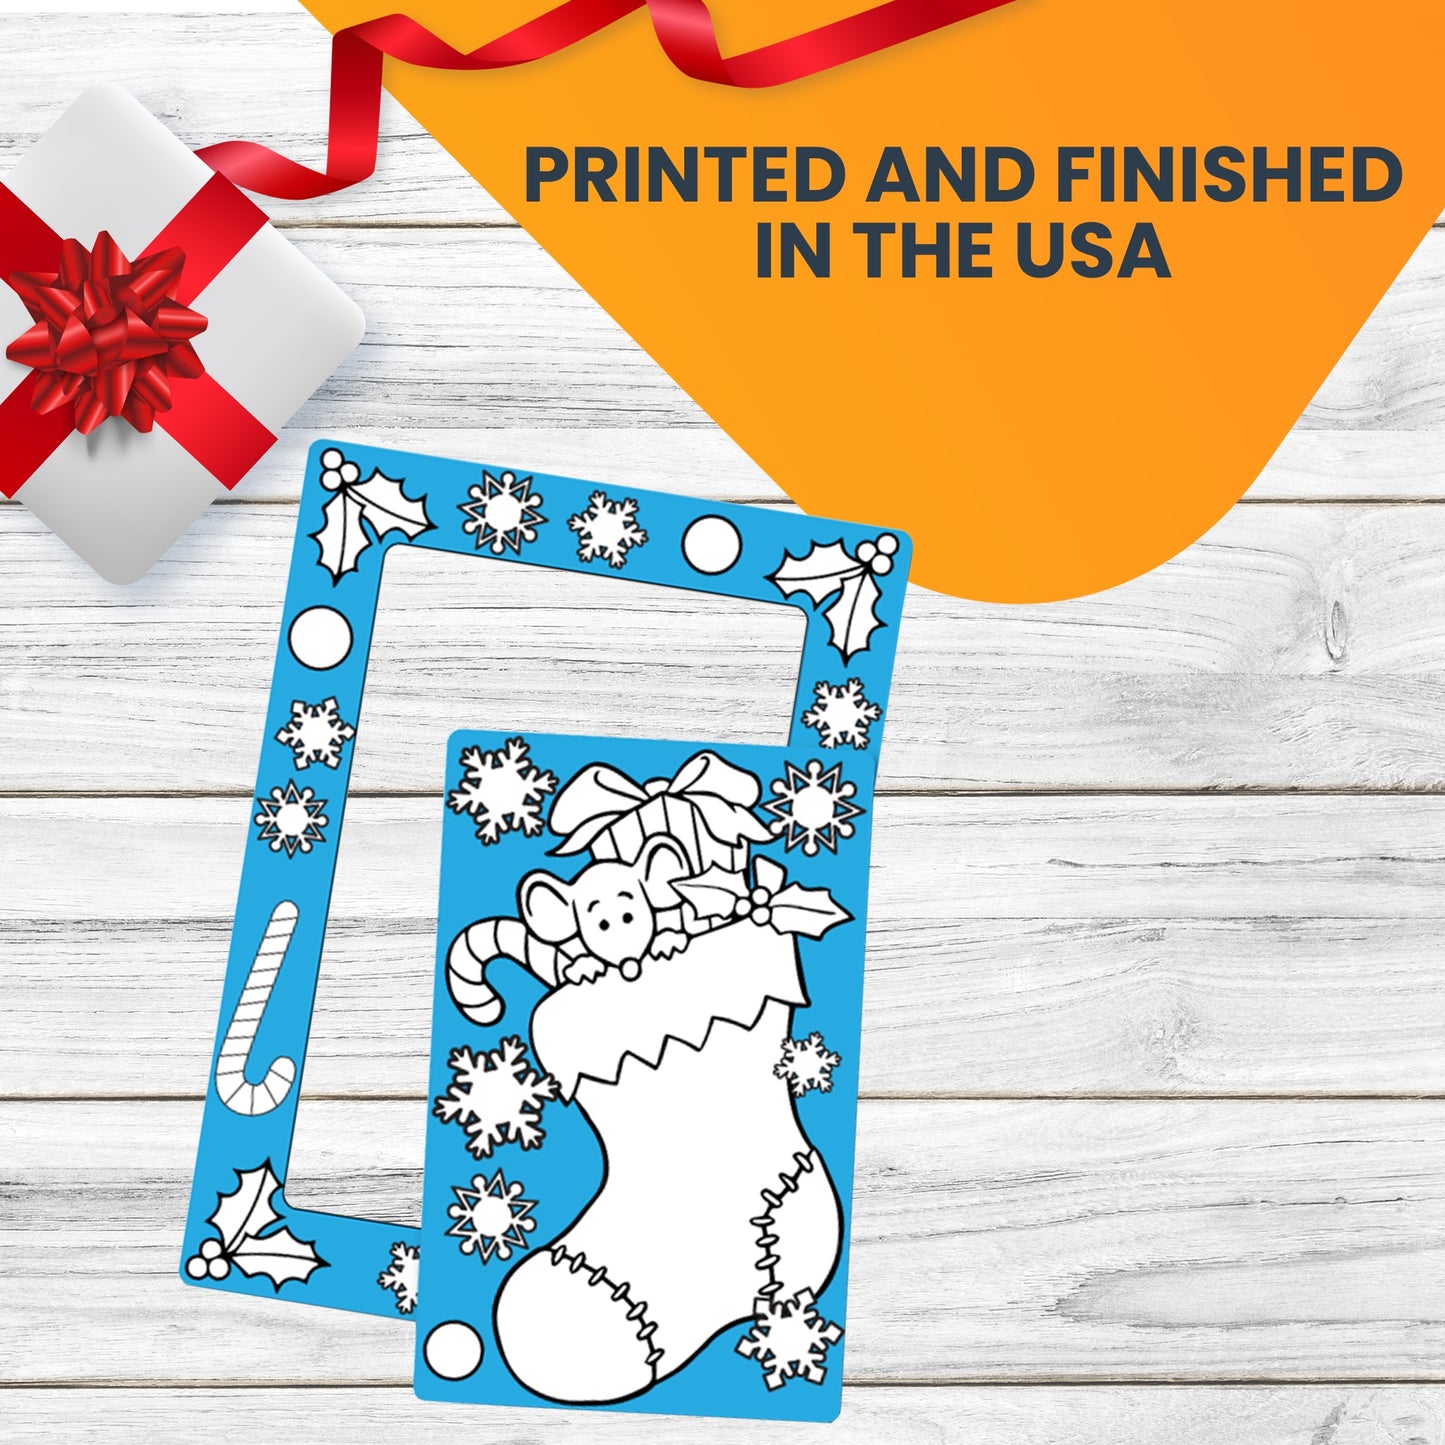 Color In Your Own Christmas Stocking Picture Frame Magnet, DIY, Decorate a Holiday Magnetic Picture Frame - 5 x 7" Frame with a 3.5 x 5.5" Cut-Out Center Magnet